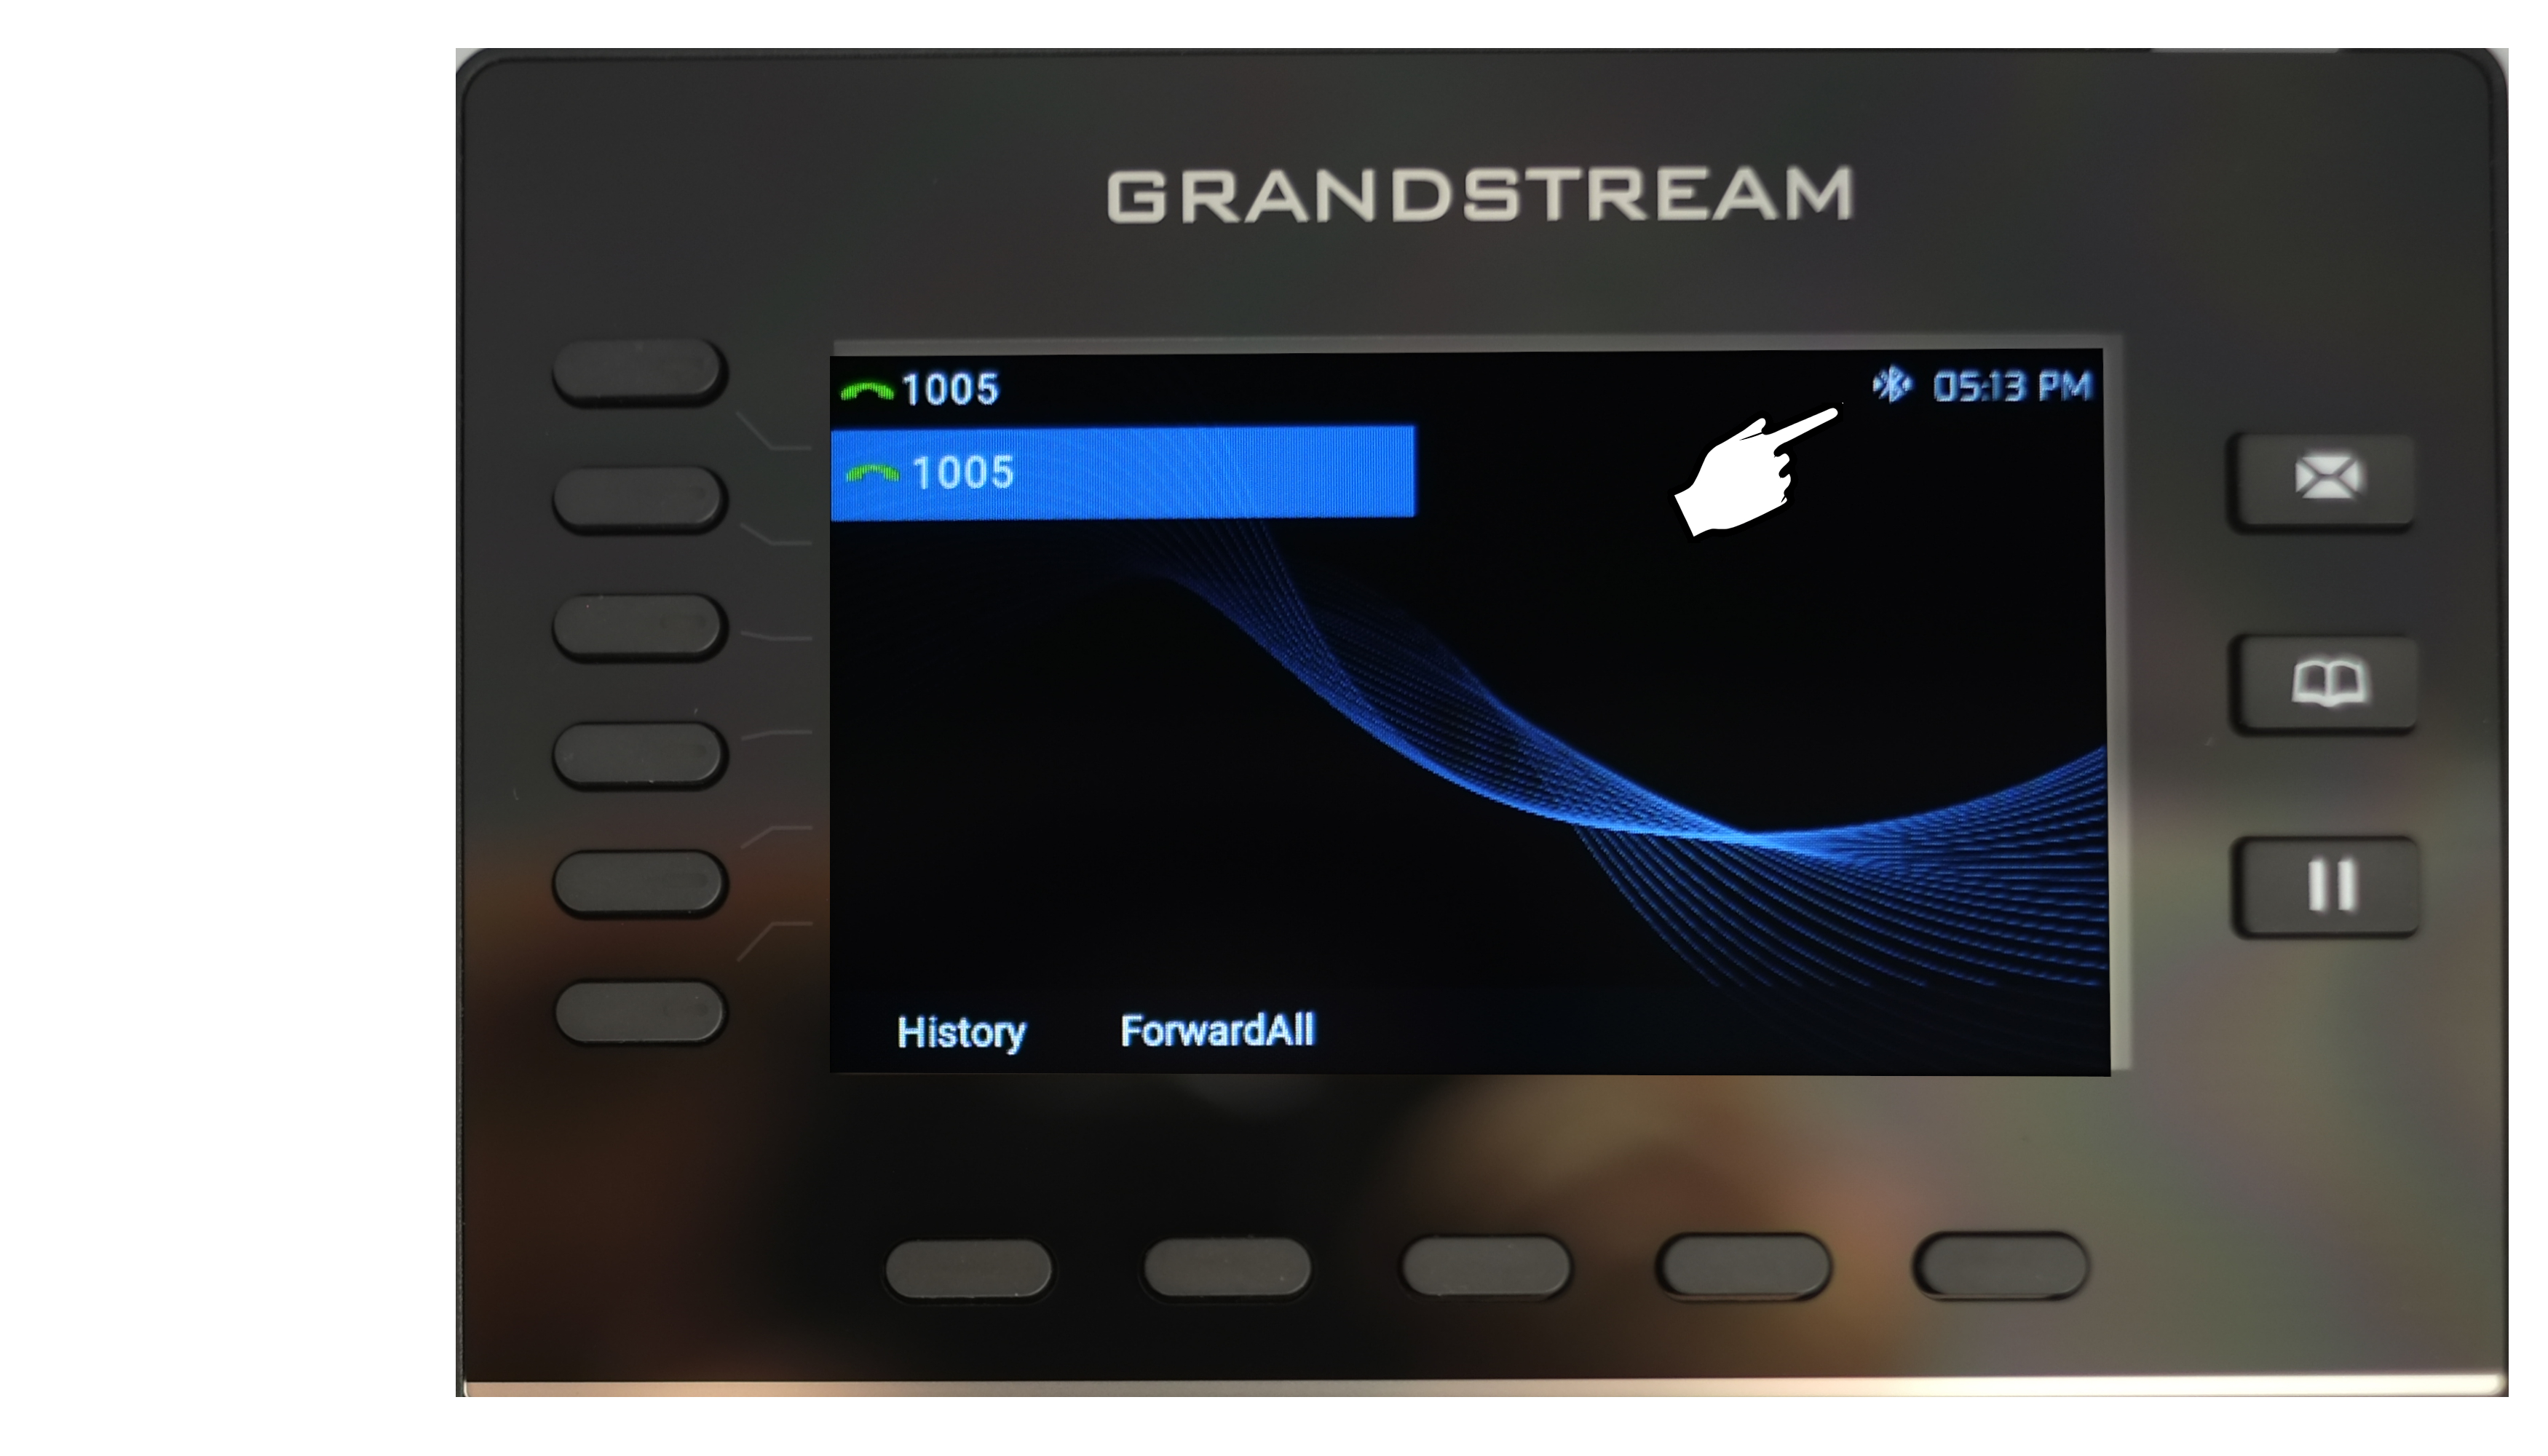 Grandstream phone Bluetooth device connected